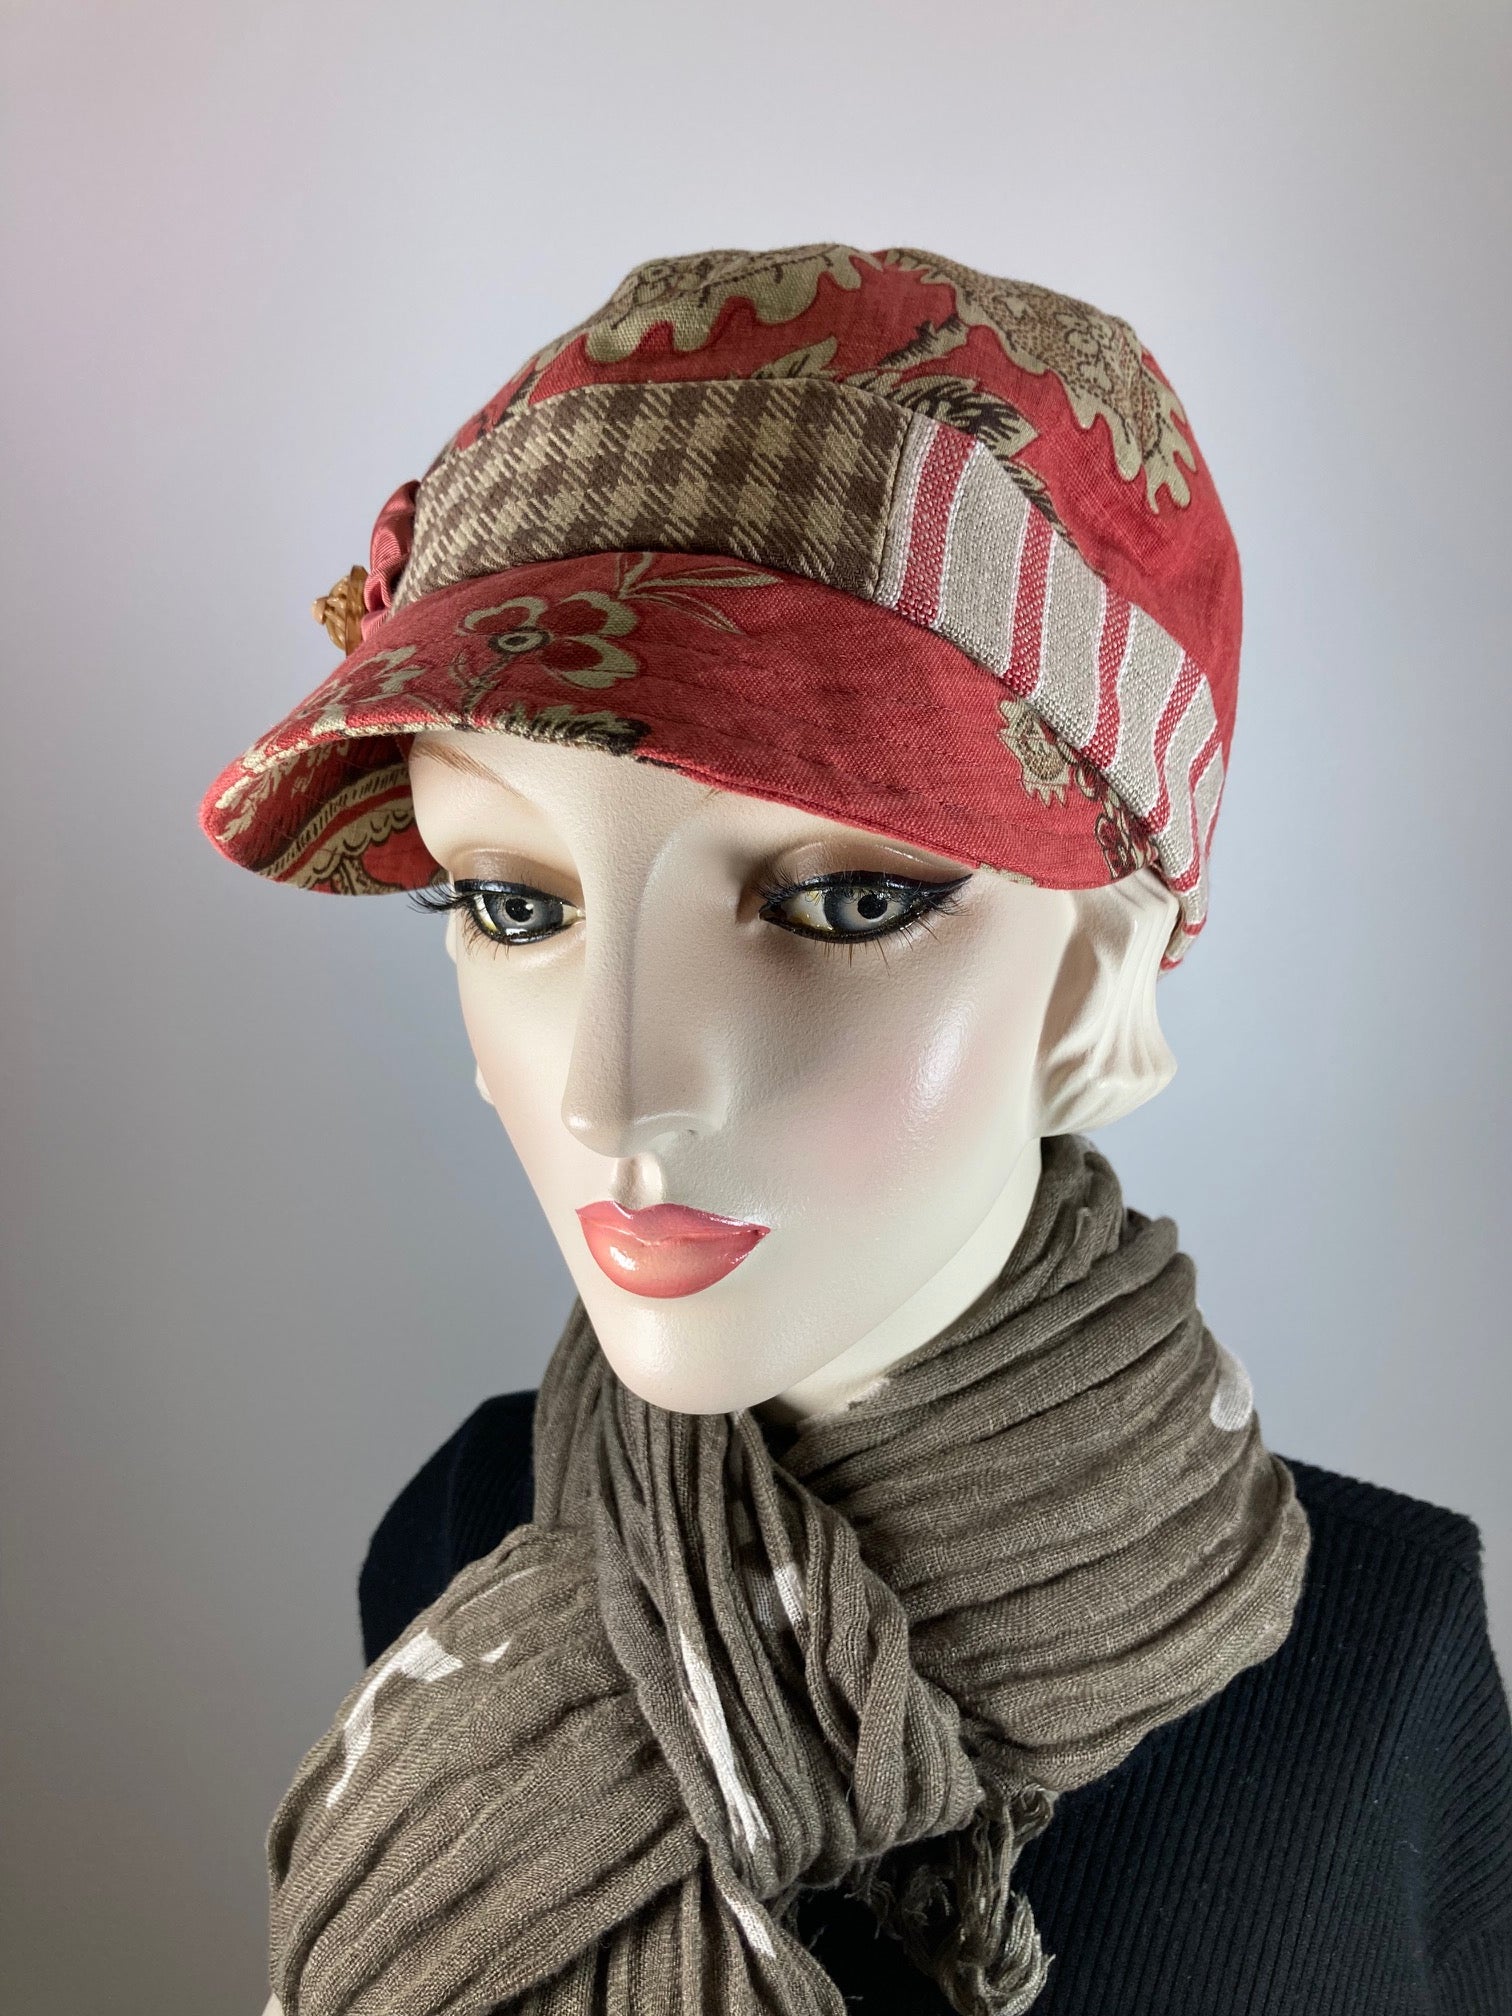 Women's Linen Cap Baseball. Newsboy Cap Russet tan floral. Cool summer casual hat. Sustainable fabric Eco friendly hat. Red cabby cap